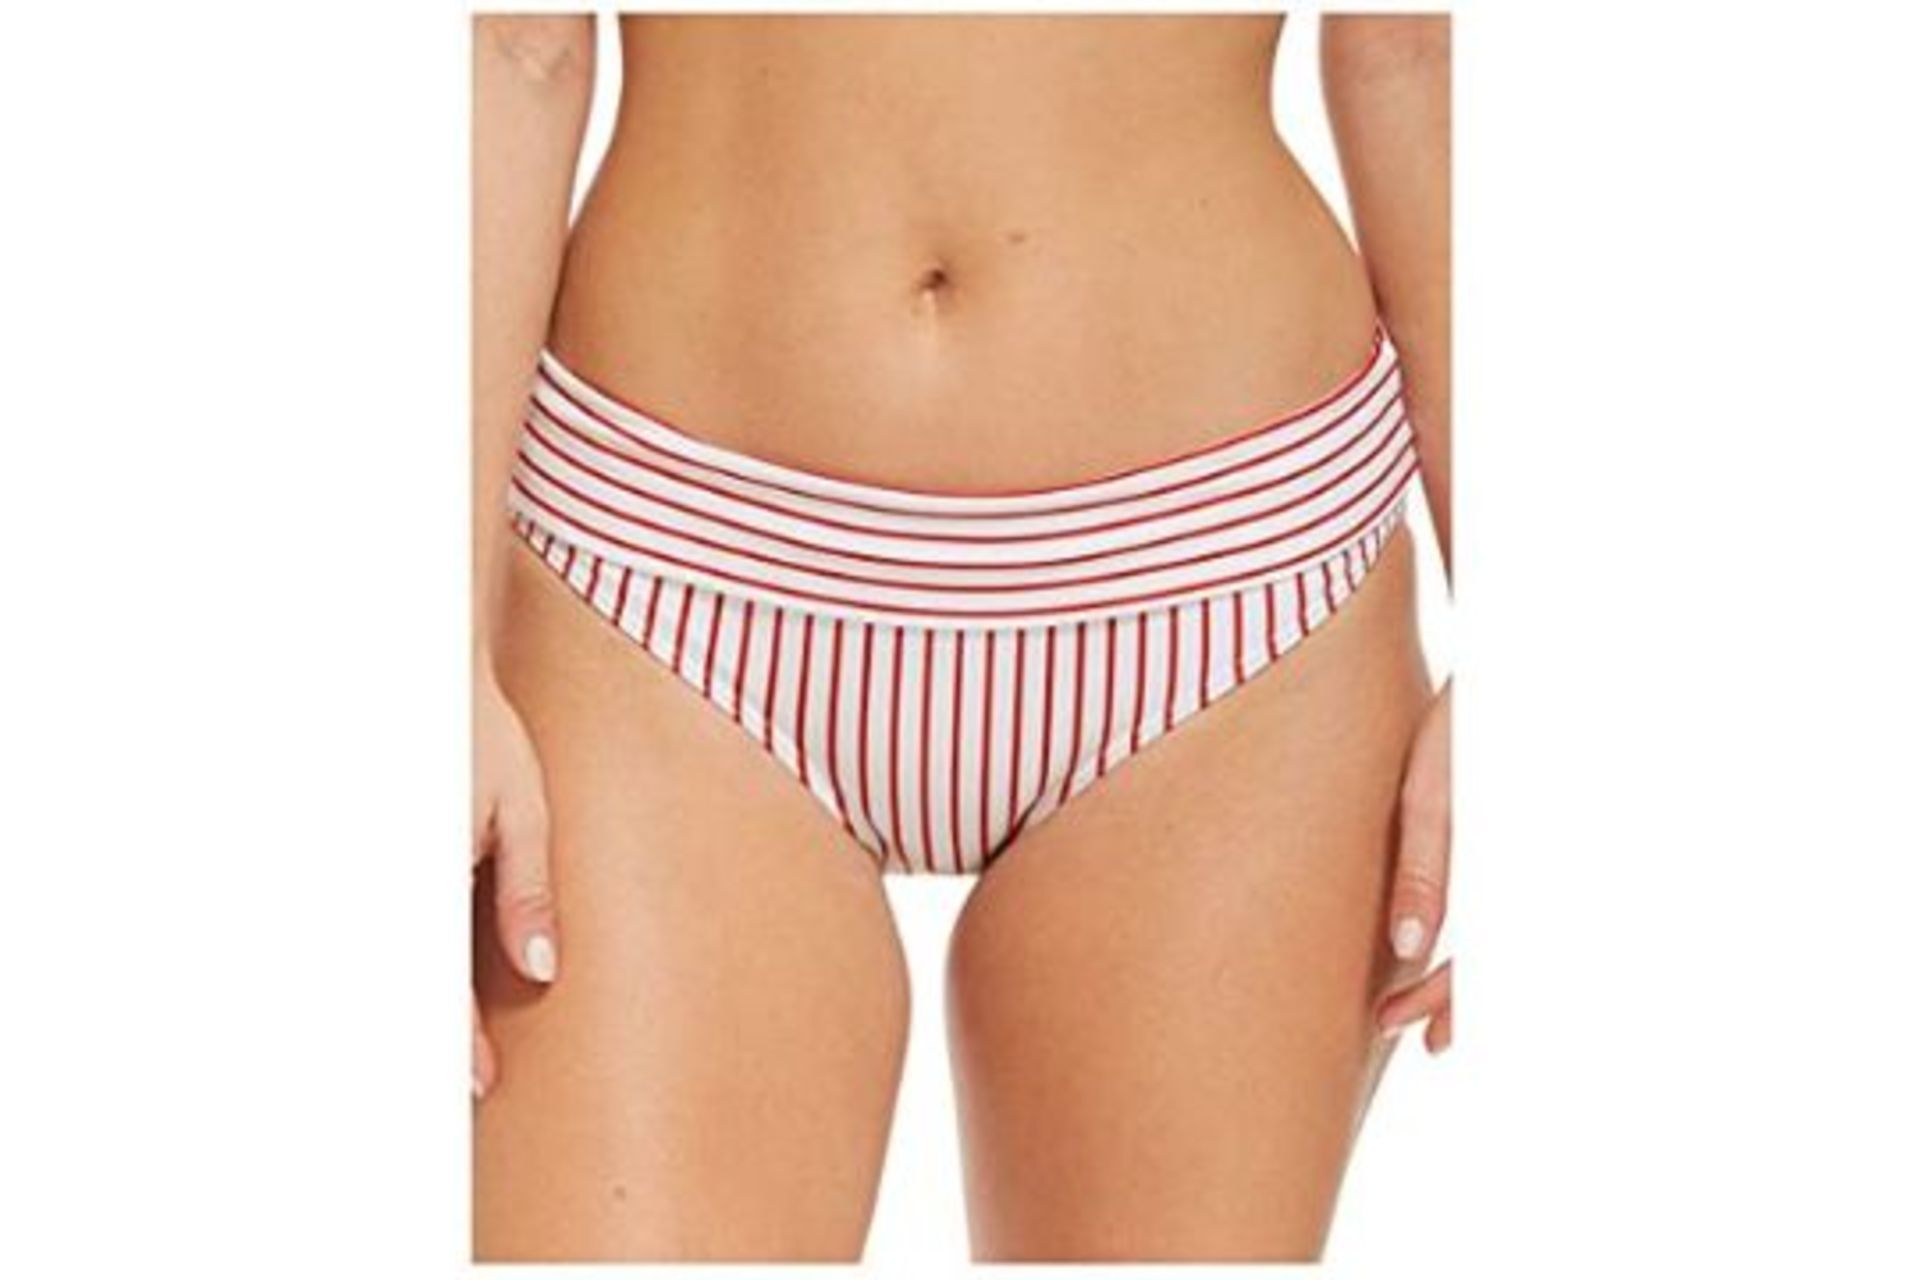 20 X BRAND NEW INDIVIDUALLY PACKAGED FIGLEAVES CASTAWAY FOLD BIKINI BOTTOMS RED/WHITE STRIPE SIZE 16